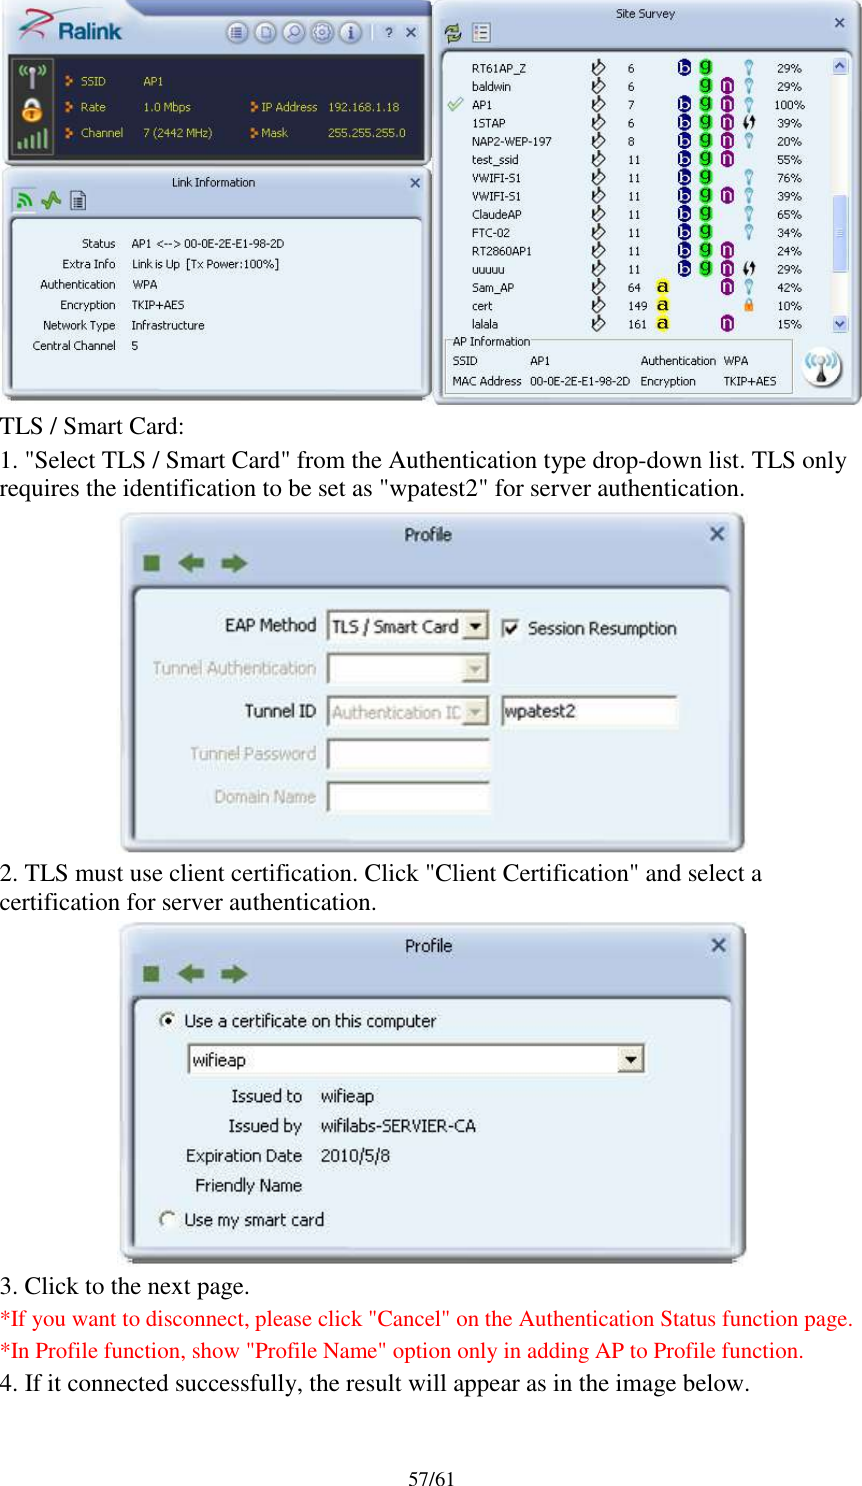 57/61TLS / Smart Card:1. &quot;Select TLS / Smart Card&quot; from the Authentication type drop-down list. TLS onlyrequires the identification to be set as &quot;wpatest2&quot; for server authentication.2. TLS must use client certification. Click &quot;Client Certification&quot; and select acertification for server authentication.3. Click to the next page.*If you want to disconnect, please click &quot;Cancel&quot; on the Authentication Status function page.*In Profile function, show &quot;Profile Name&quot; option only in adding AP to Profile function.4. If it connected successfully, the result will appear as in the image below.